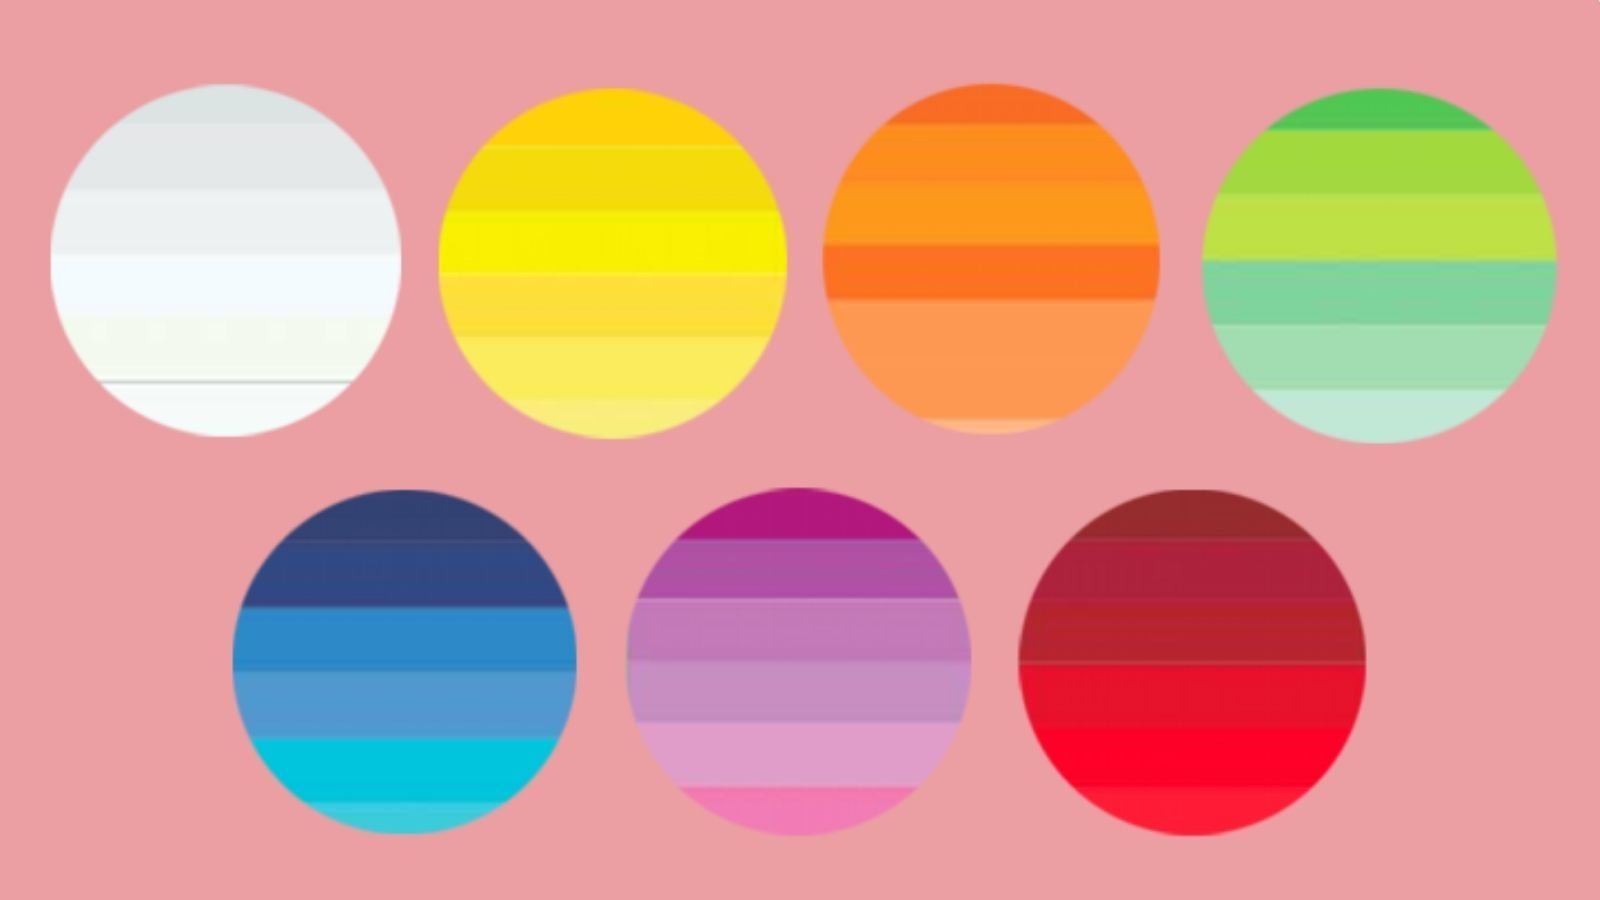 Discover yourself through the popular color test in Korea